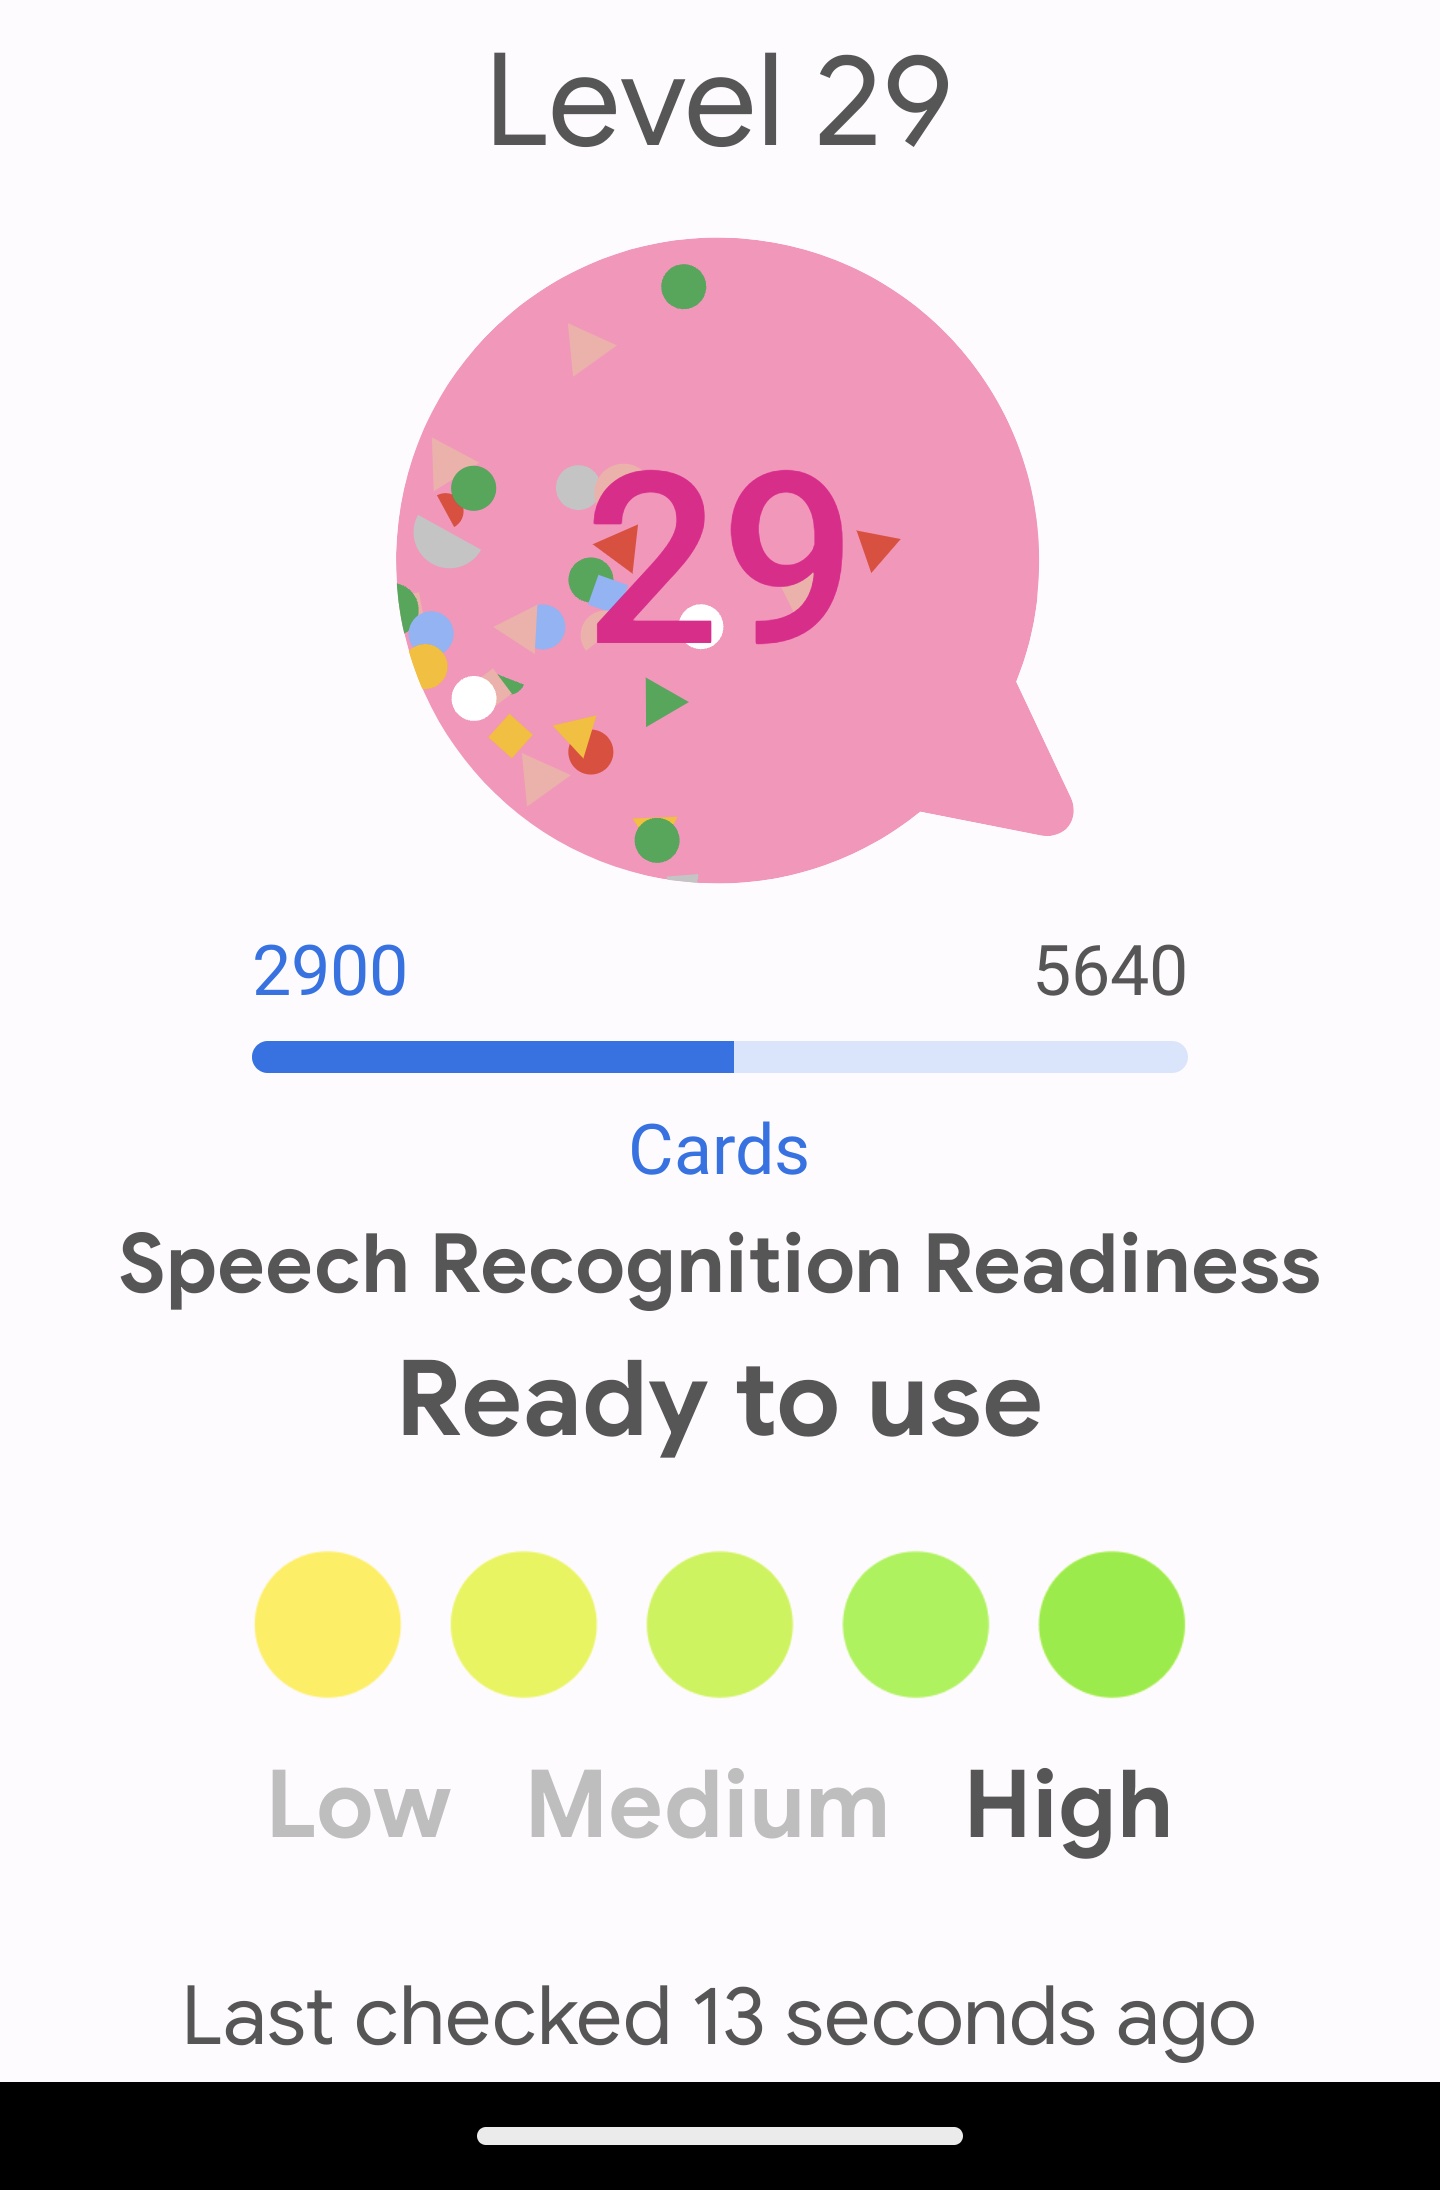 Screenshot from inside Colin's Project Relate app showing his progress in recording cards. It shows Level 29 and indicates a mid level of cards on a chart between 2900 and 5640